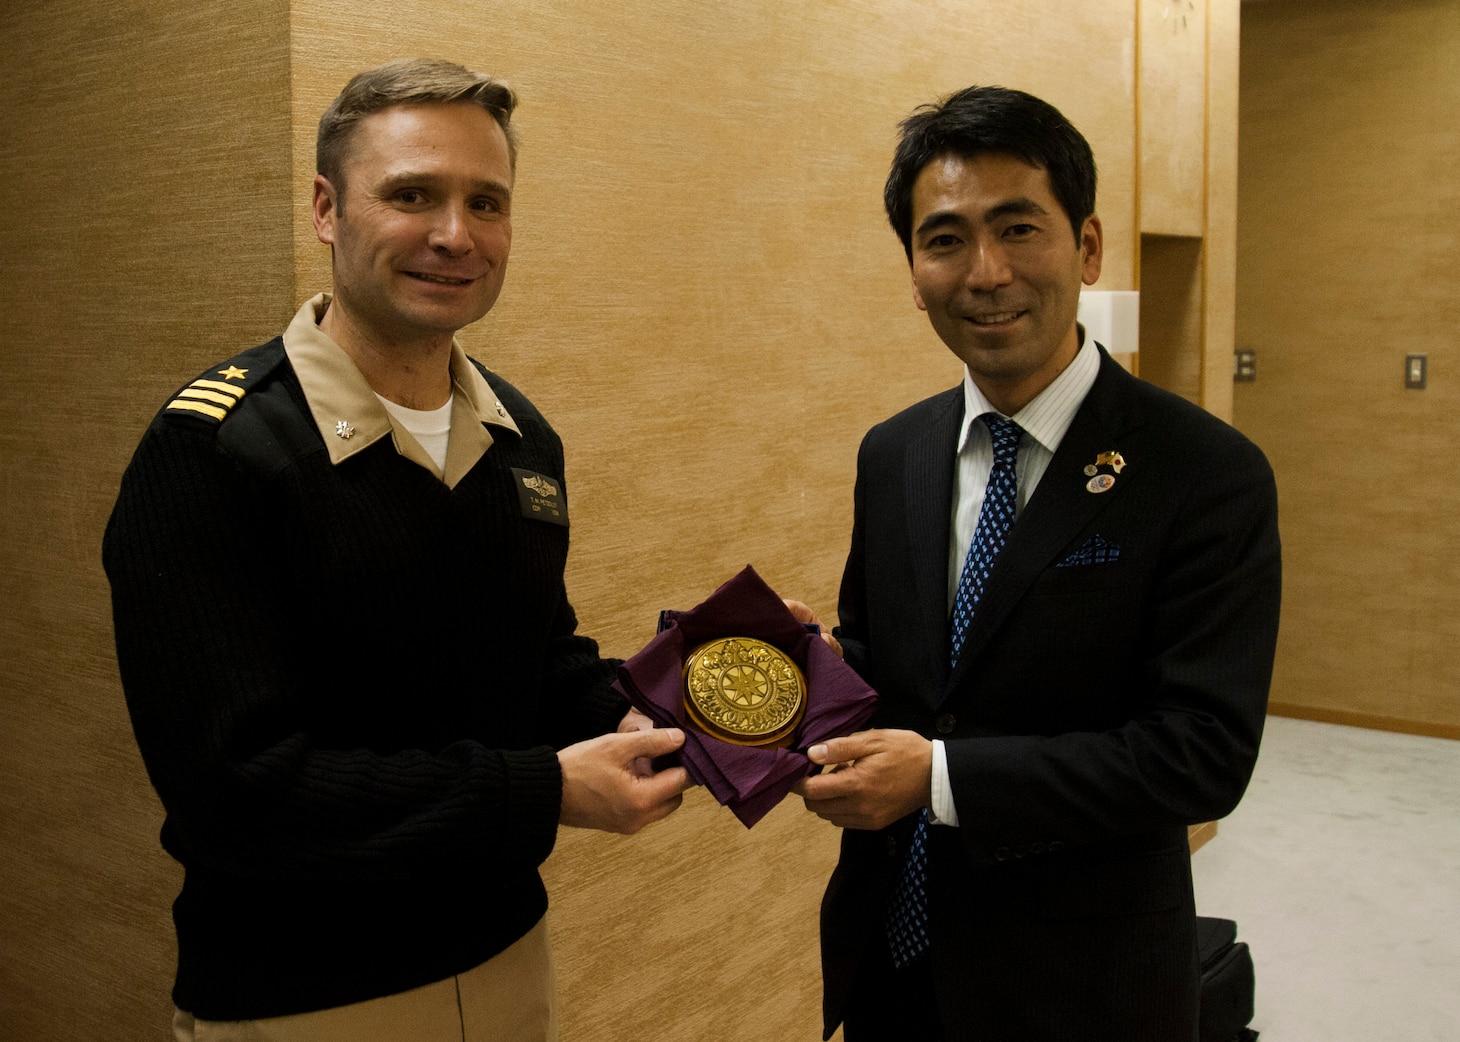 160113-N-ED185-031
YOKOSUKA, Japan (Jan. 13, 2016) Mayor Yuto Yoshida, City of Yokosuka, presents a plaque to Cmdr. Travis Petzoldt, commanding officer of the Los Angeles-class fast-attack submarine USS Corpus Christi (SSN 705), at the Yokosuka City Hall. The two leaders met to commemorate the sister cities relationship between the city of Corpus Christi and Yokosuka. This is City of Corpus Christi’s last port visit to Japan prior to the boat’s decommissioning. (U.S. Navy photo by Mass Communication Specialist 2nd Class Brian G. Reynolds/Released)
